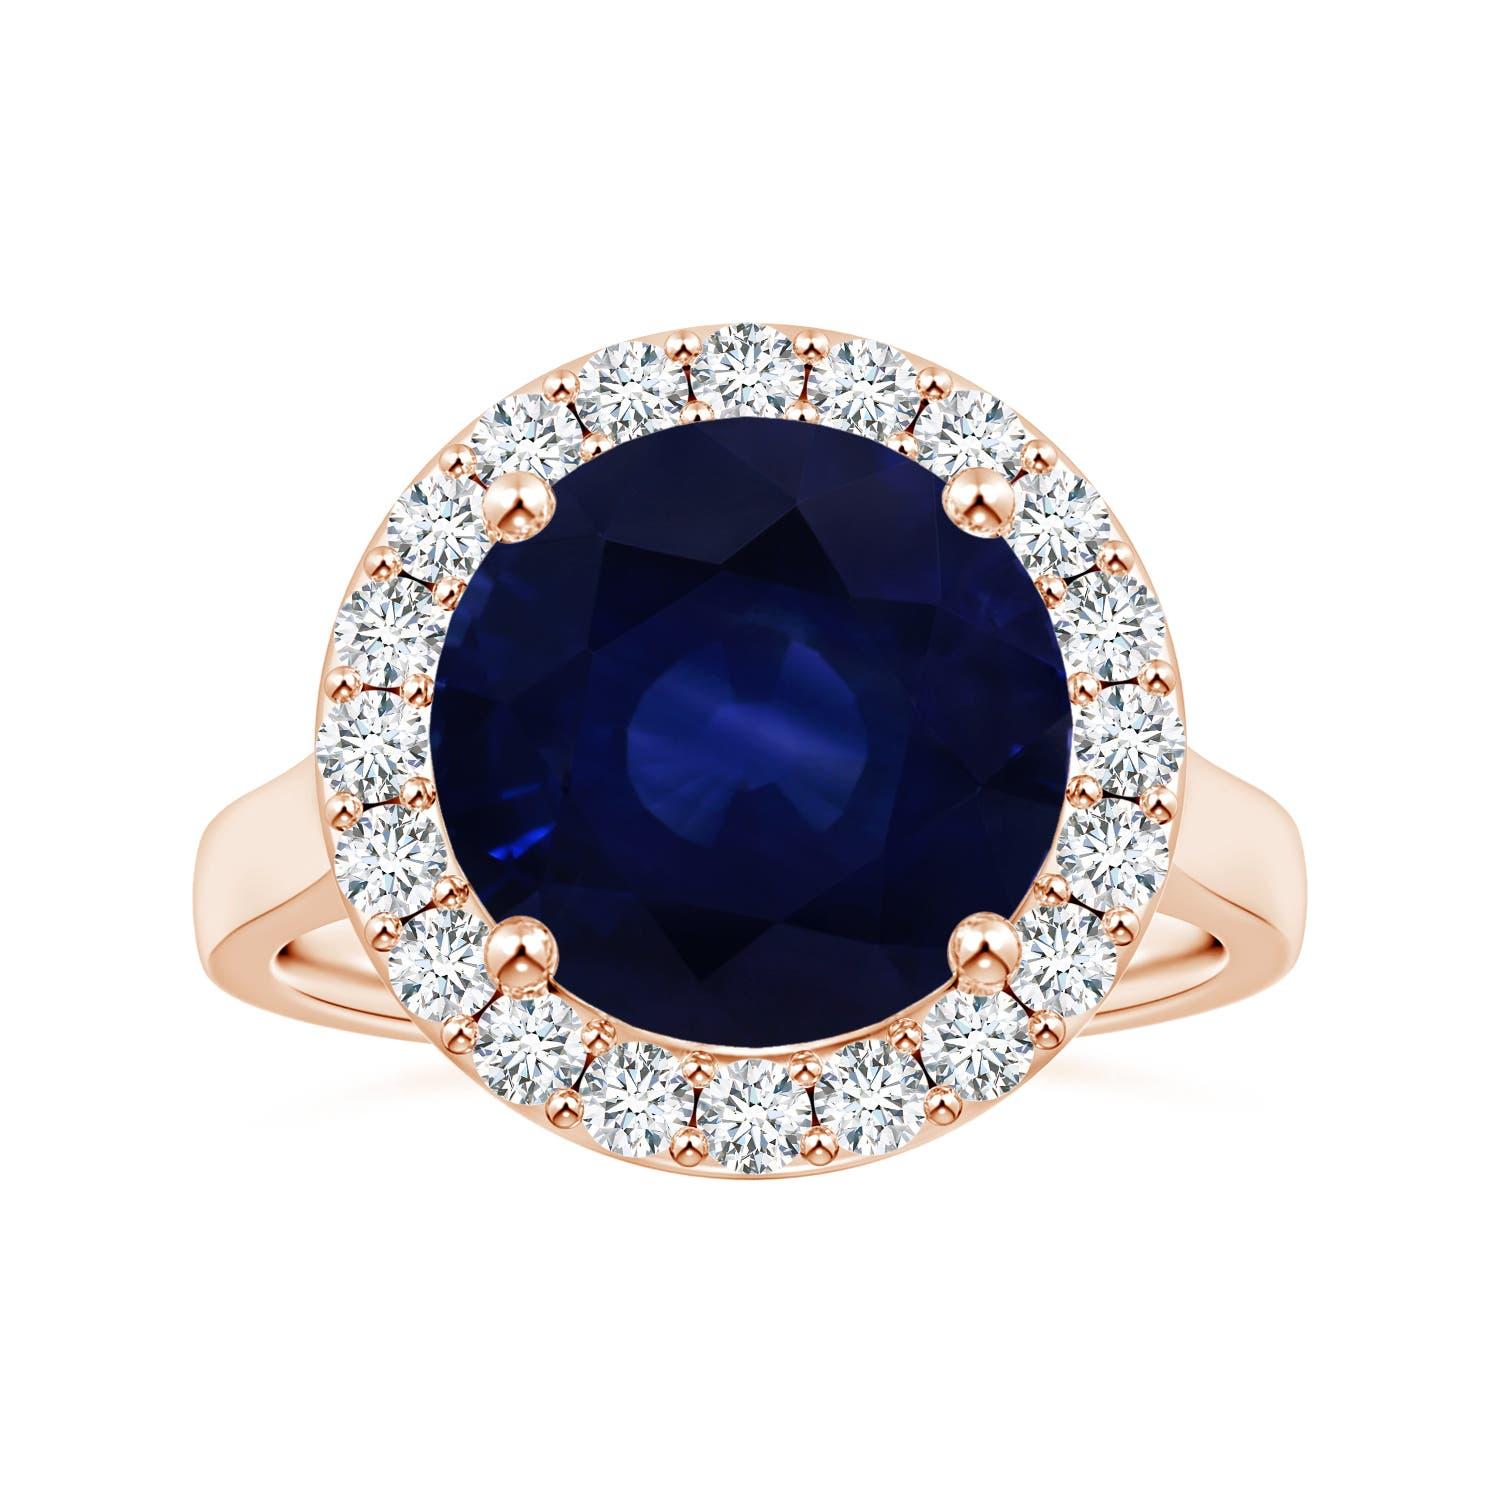 ANGARA GIA Certified Natural 6.63ct Blue Sapphire Ring with Diamond in Rose Gold